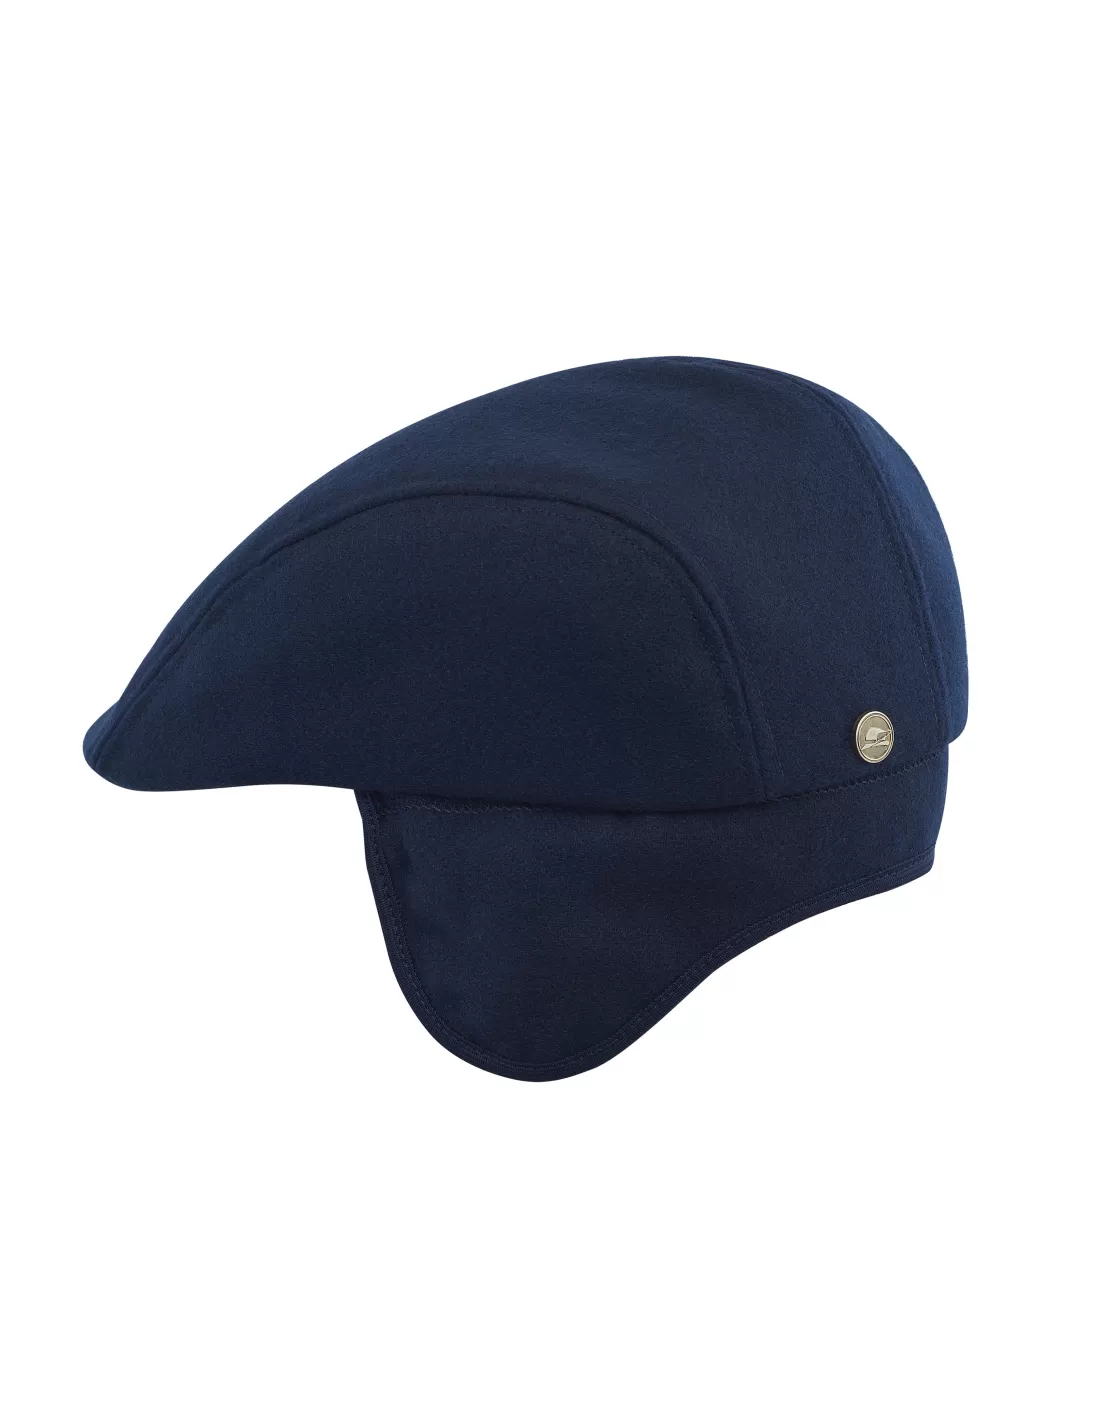 Norte - of flat with winter made padded with cap earflap cotton foldable lining wool